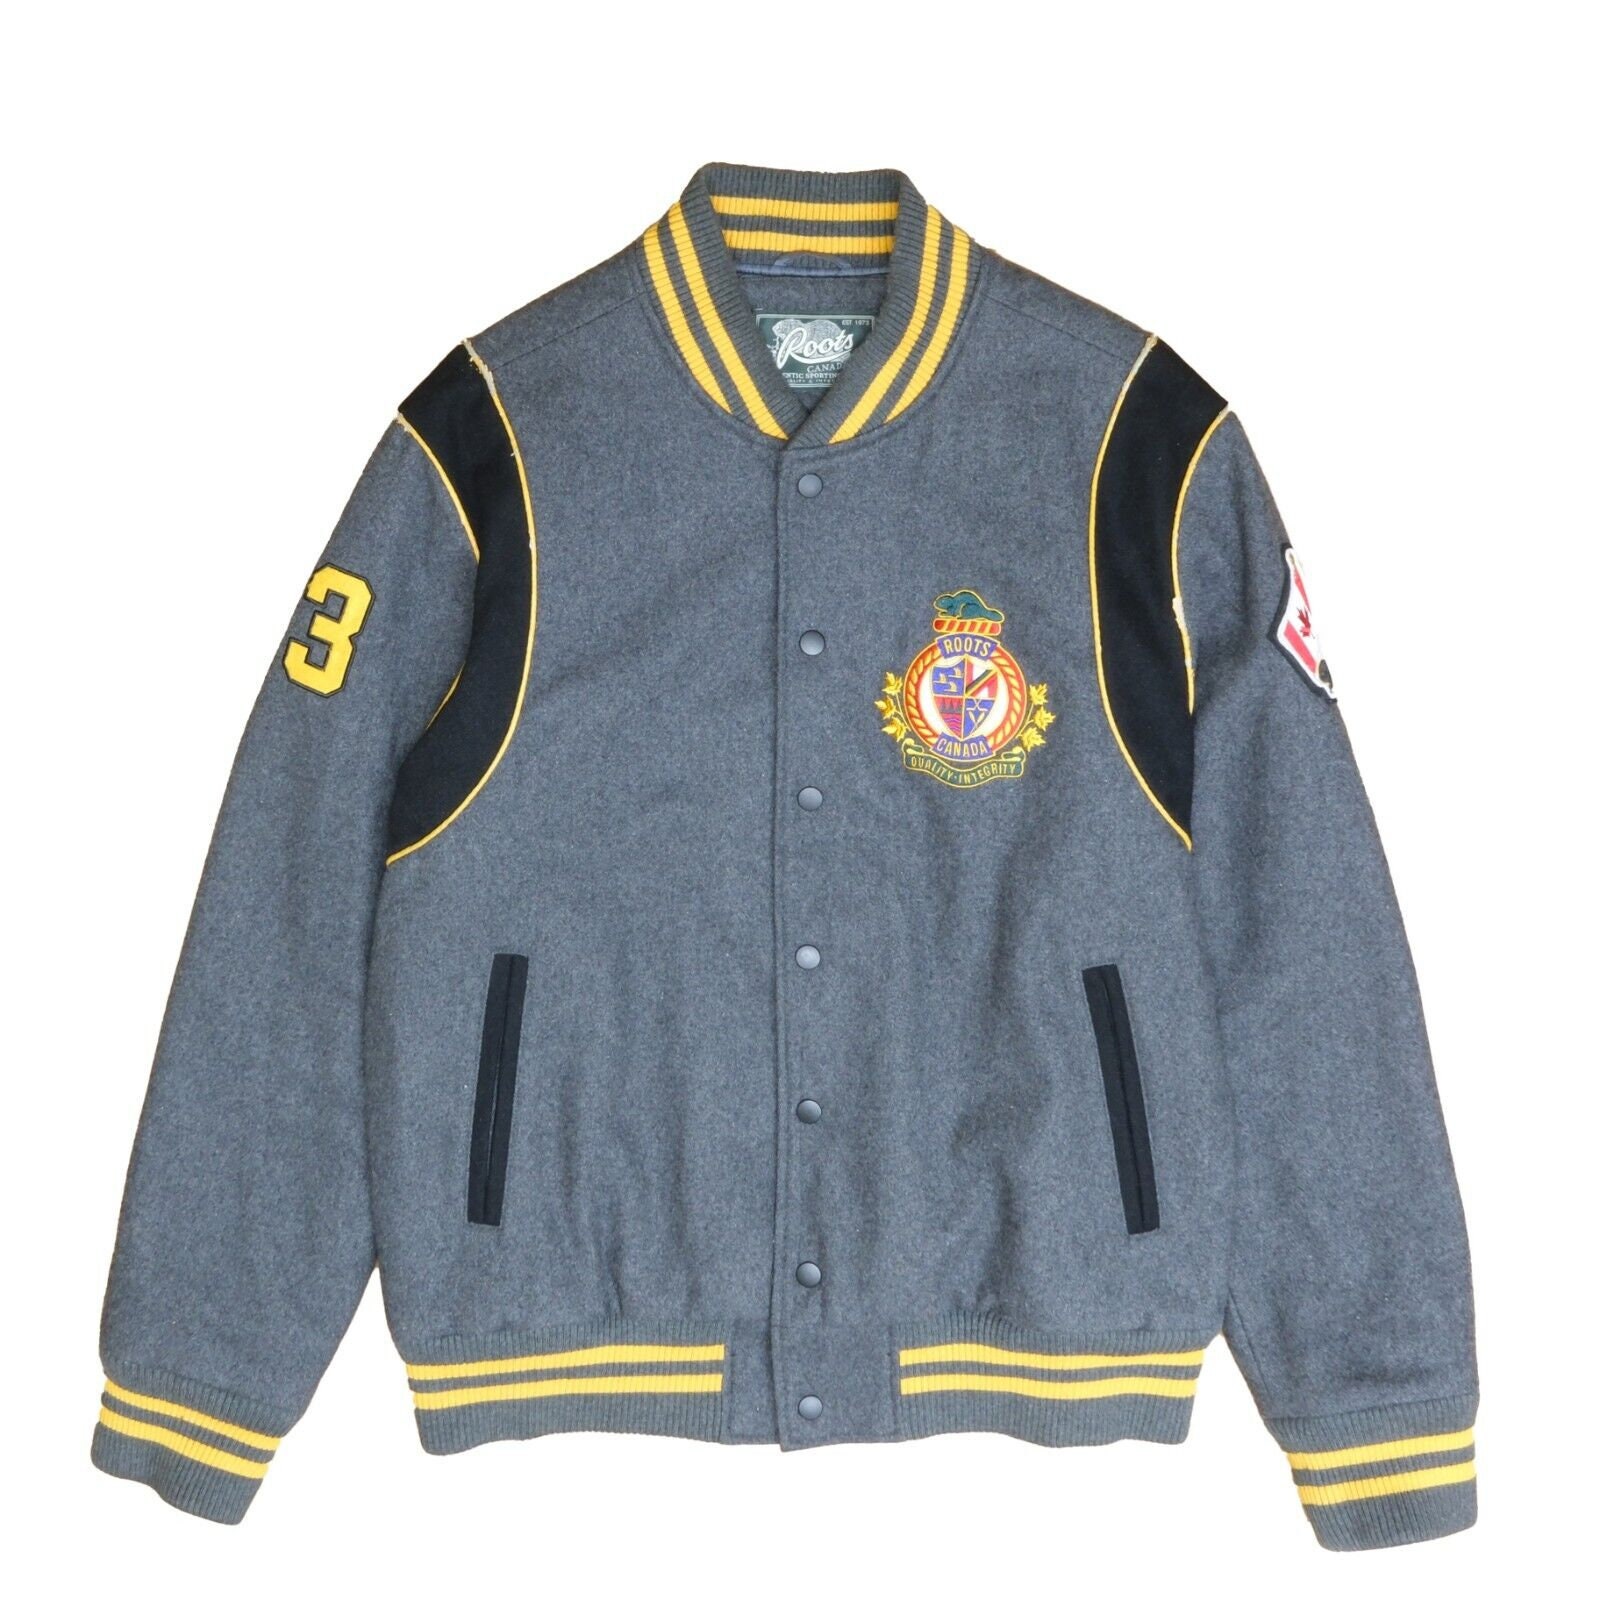 Roots, Jackets & Coats, Letterman Jacket By Roots Kids Maple Leafs Hockey